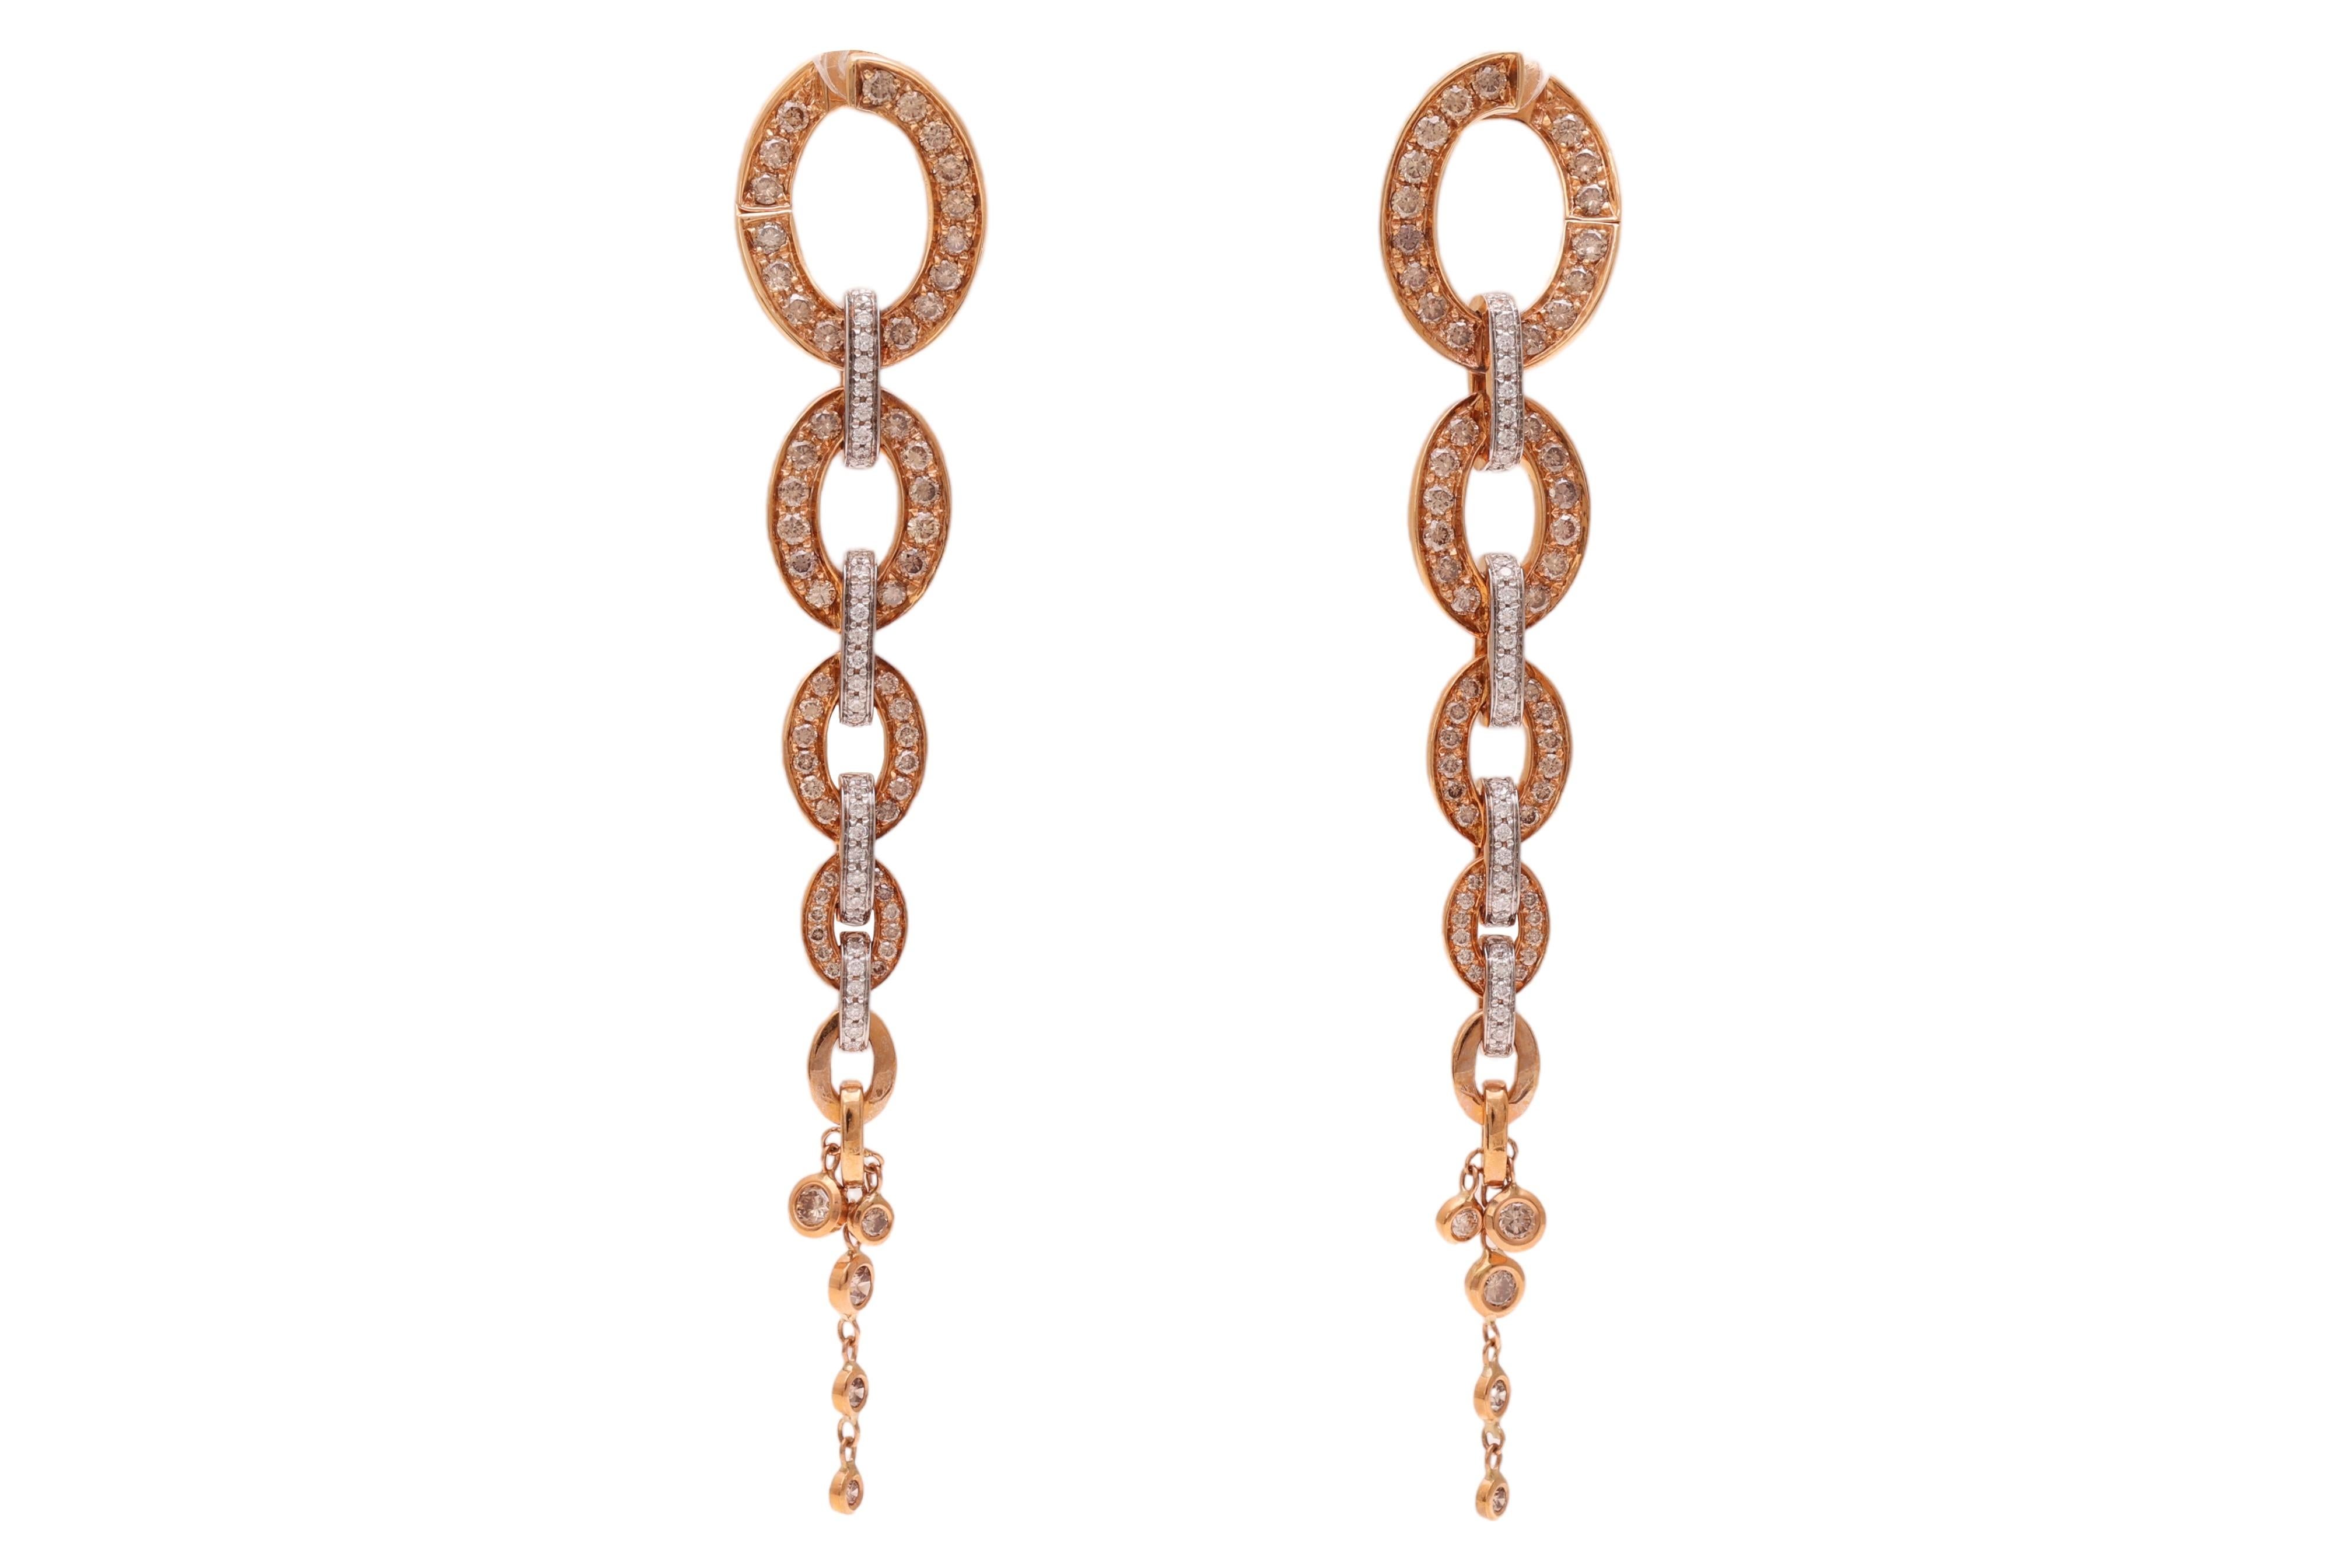 18 kt. Pink & White Gold SET Necklace & Earrings Cognac & White 9.44 Ct Diamonds For Sale 2